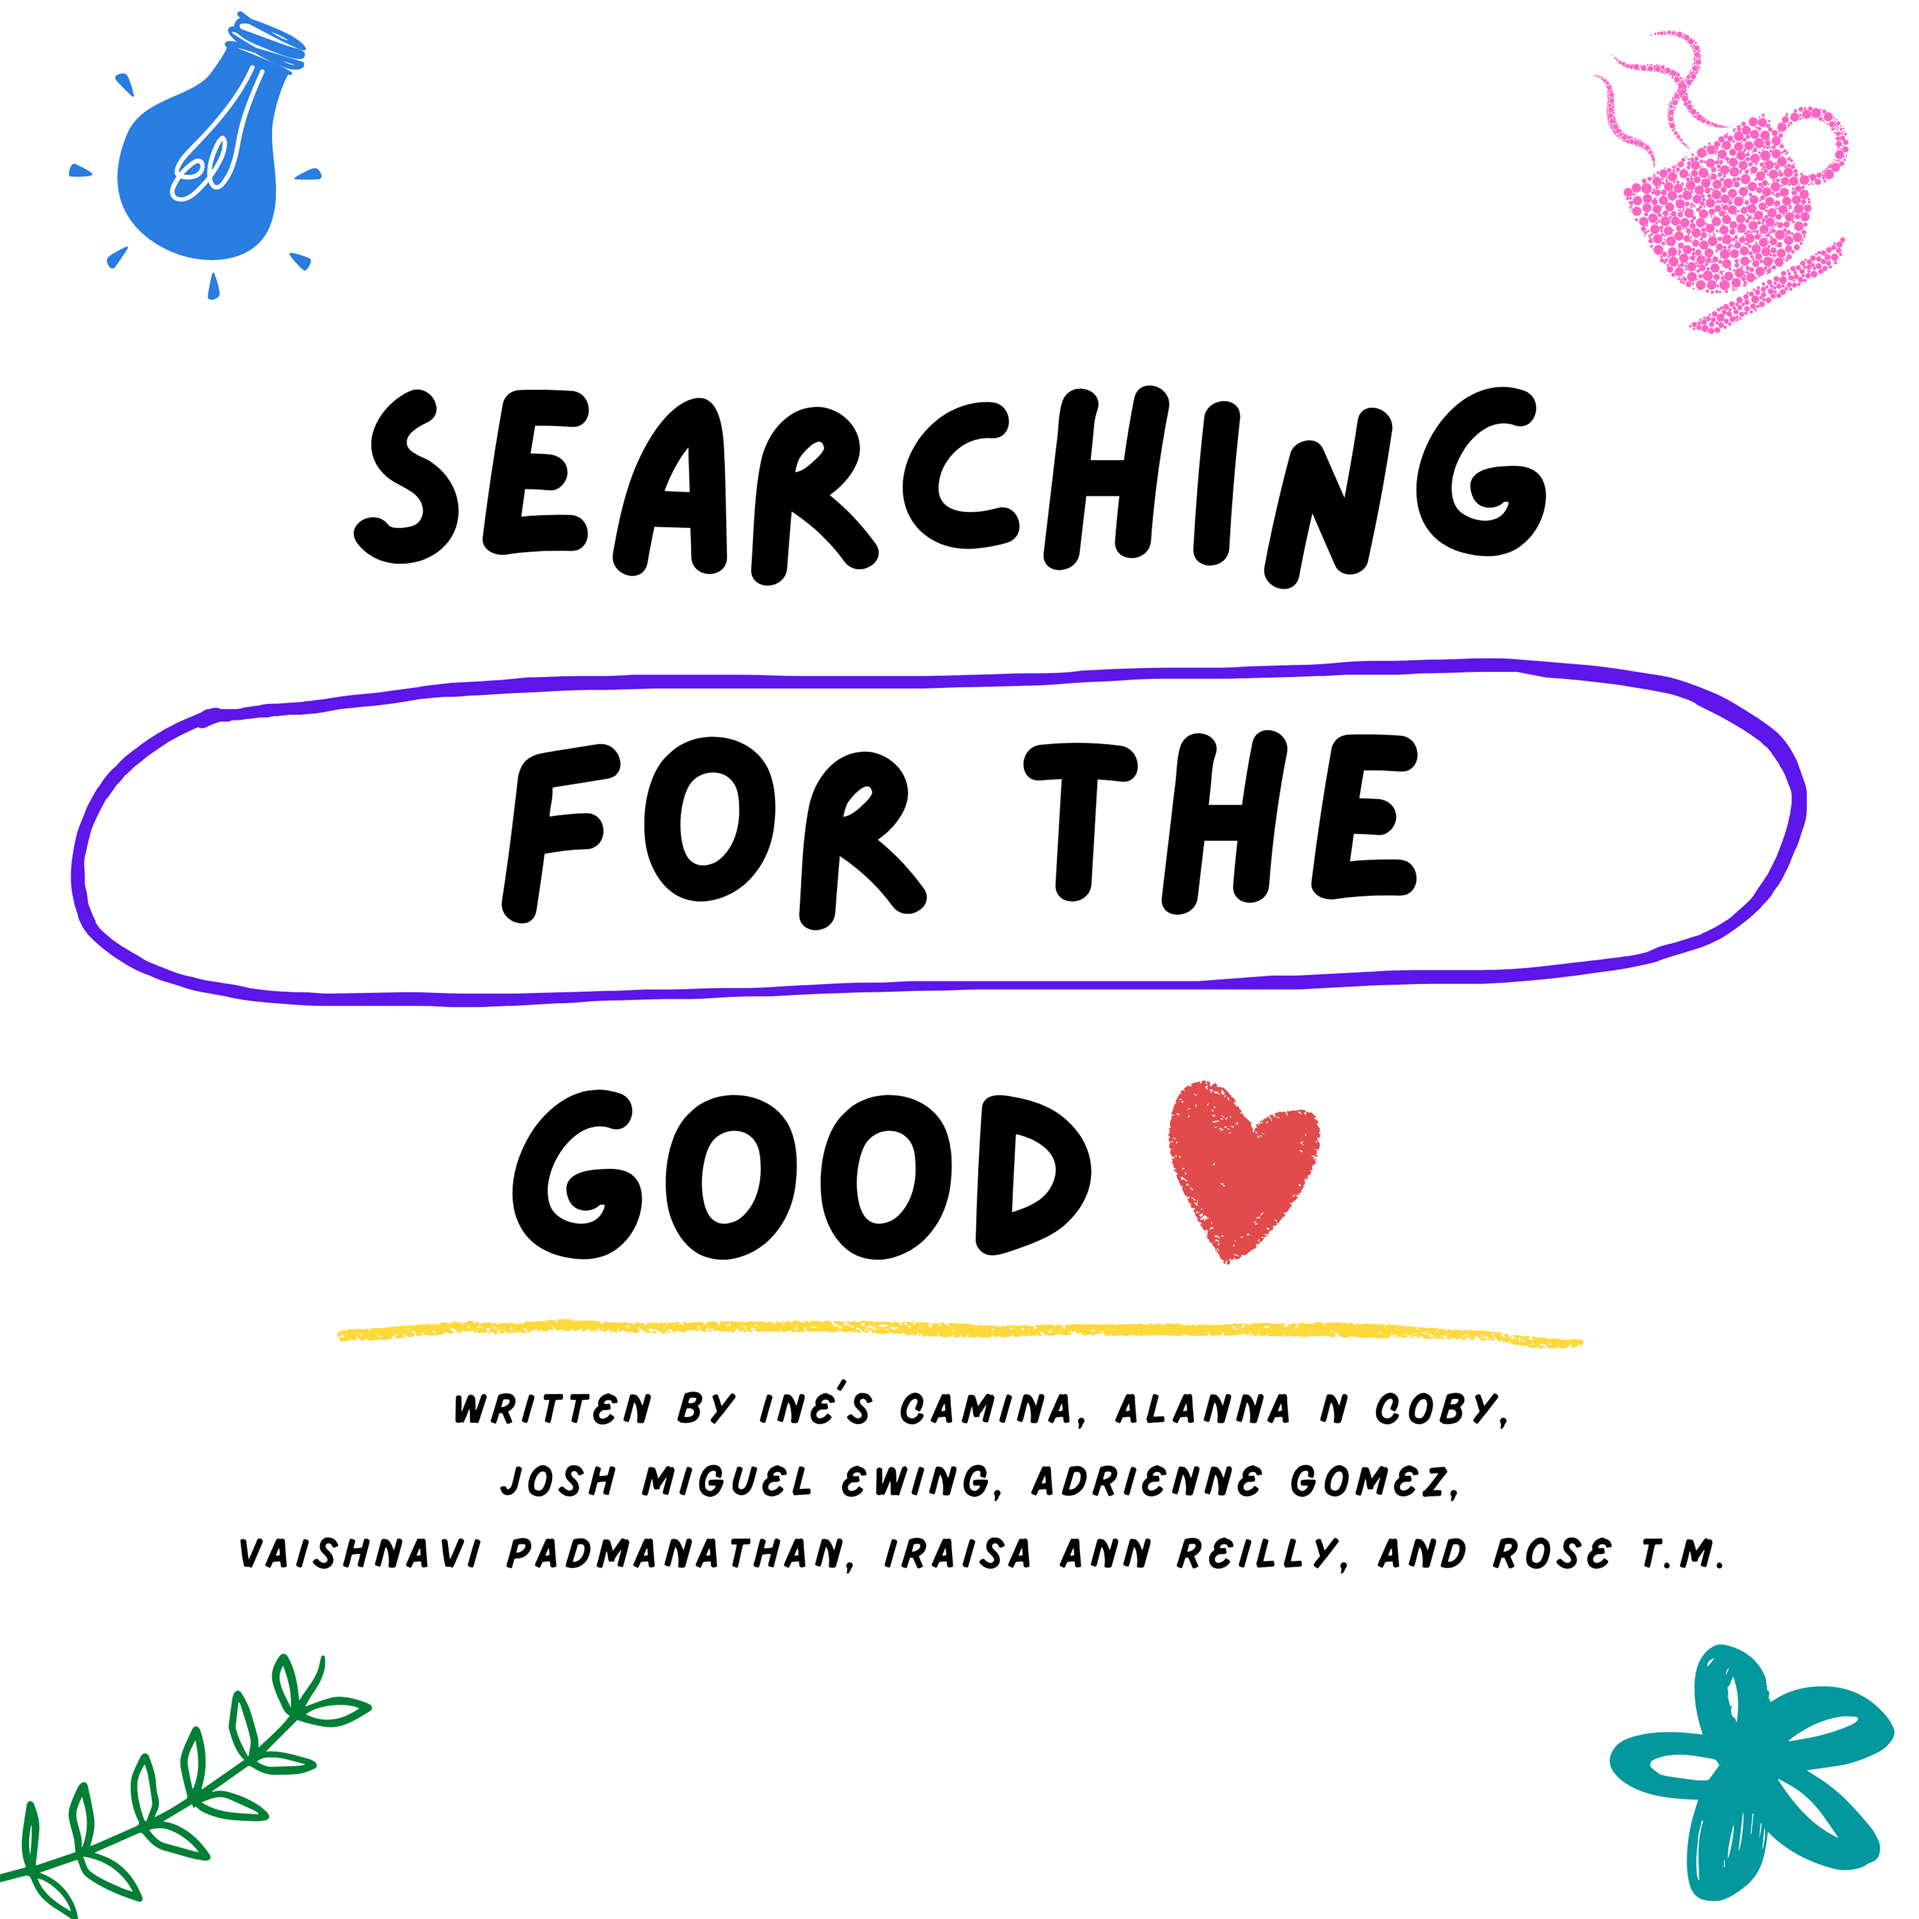 Searching for the Good